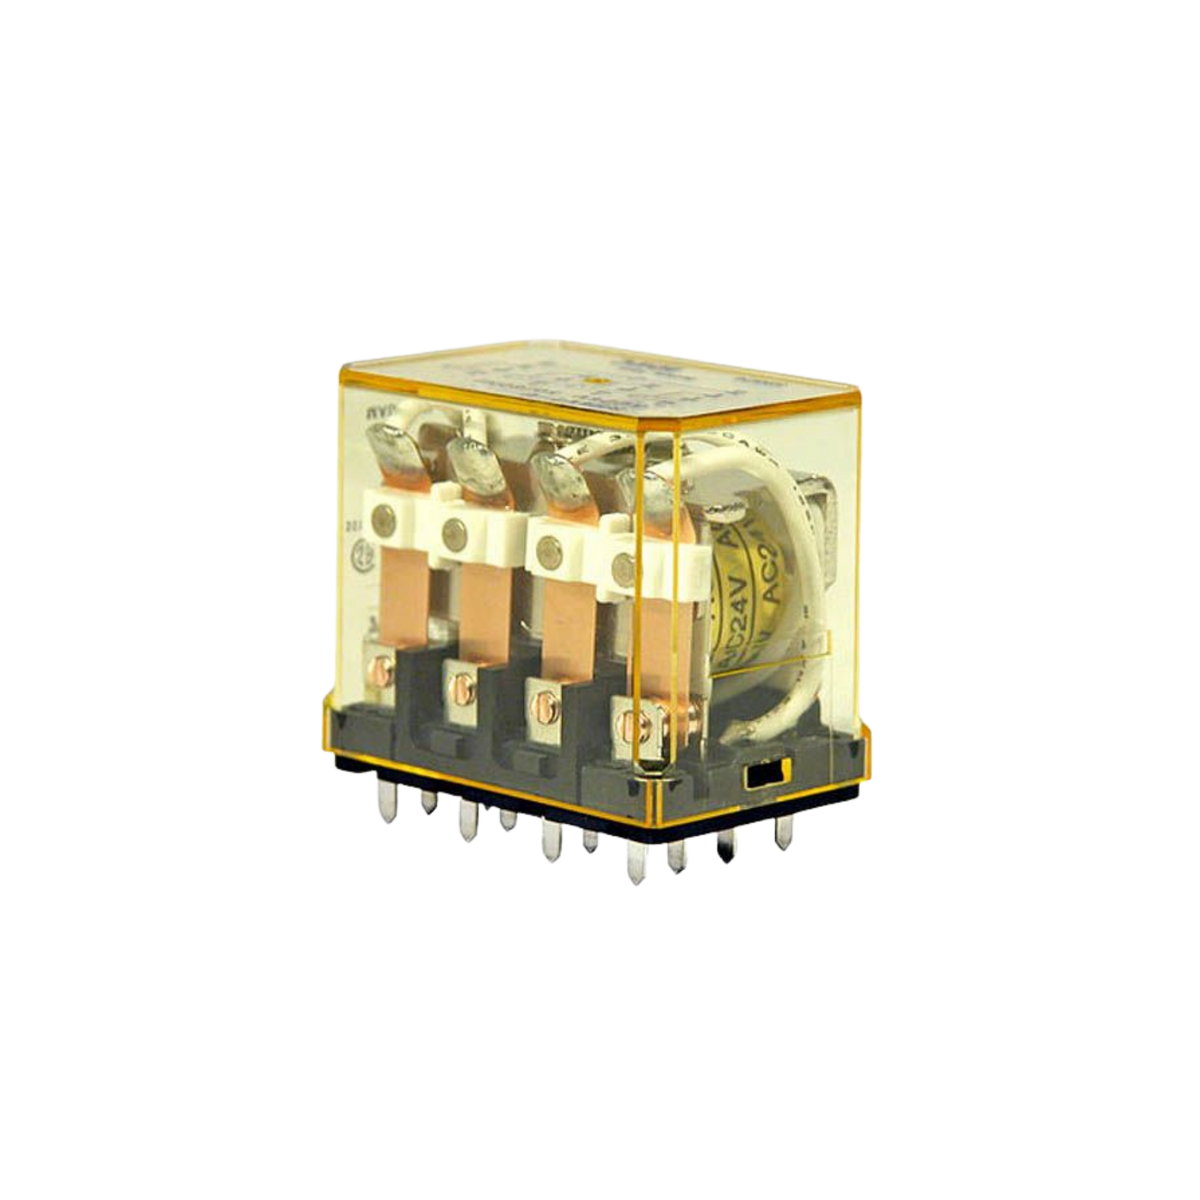 upright rectangular relay unit with clear yellow housing, wires and contacts inside, and metal tabs on the bottom